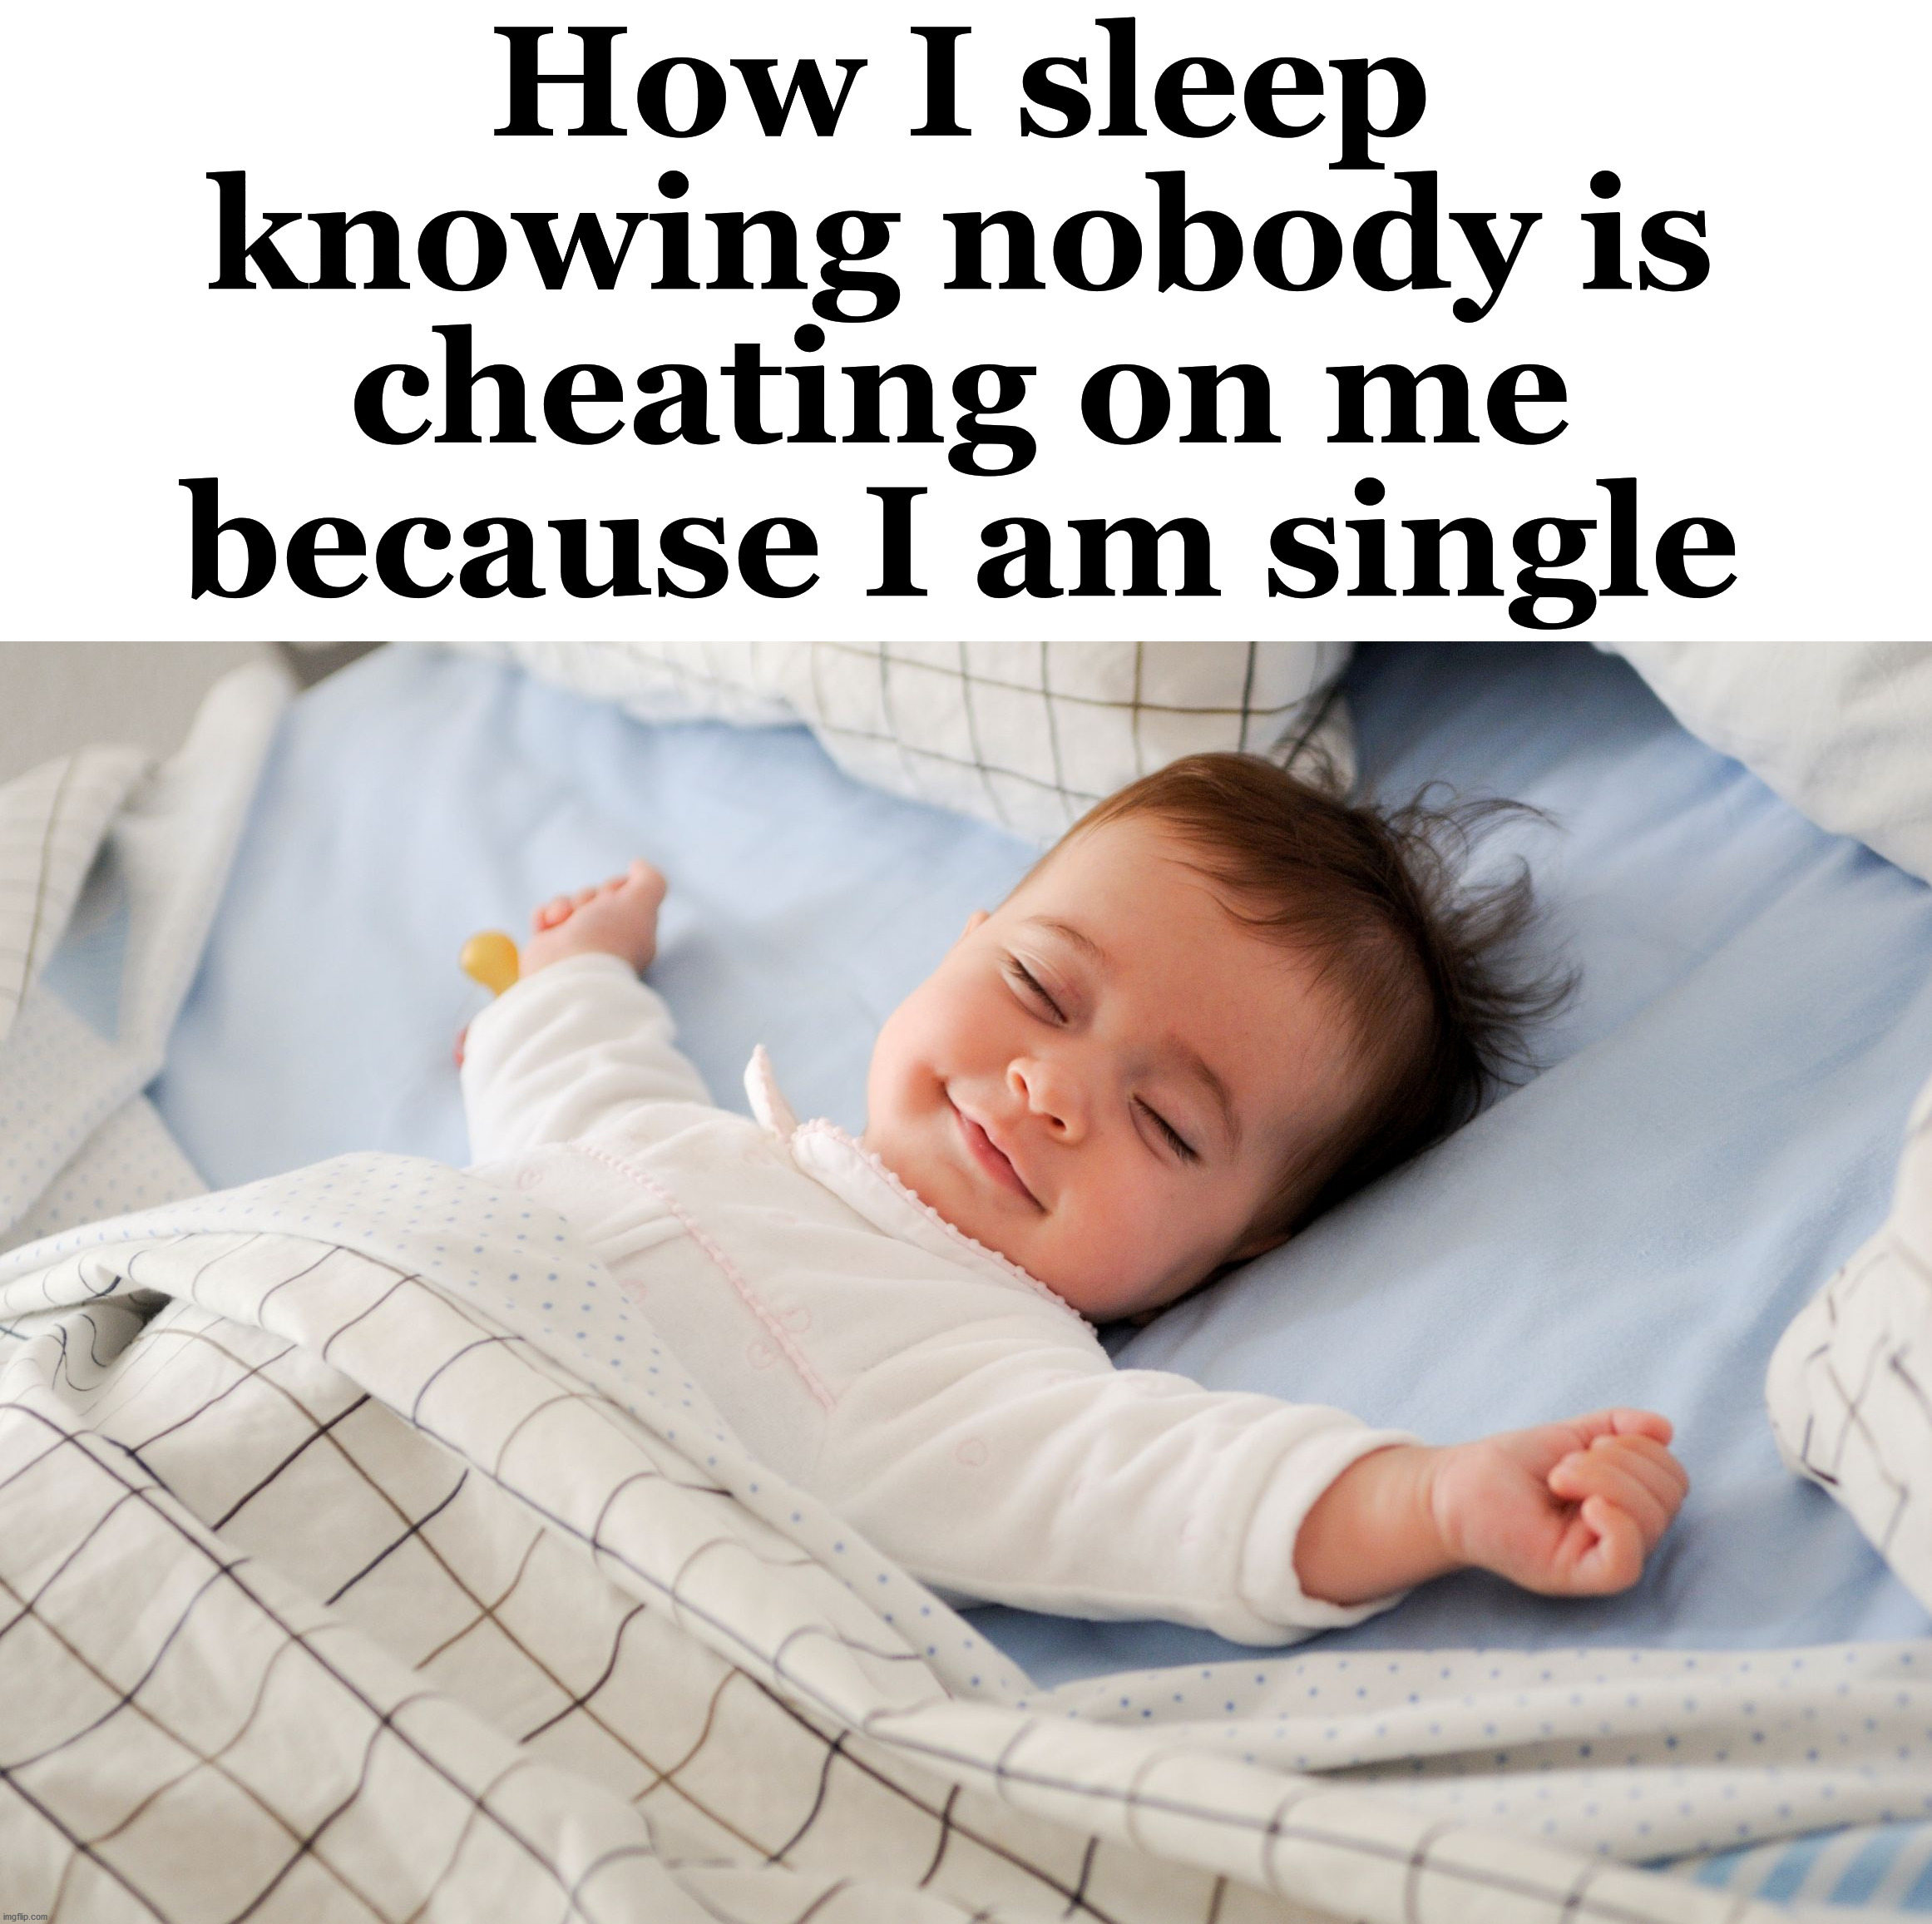 Sleep like a baby. A benefit being single. Imgflip